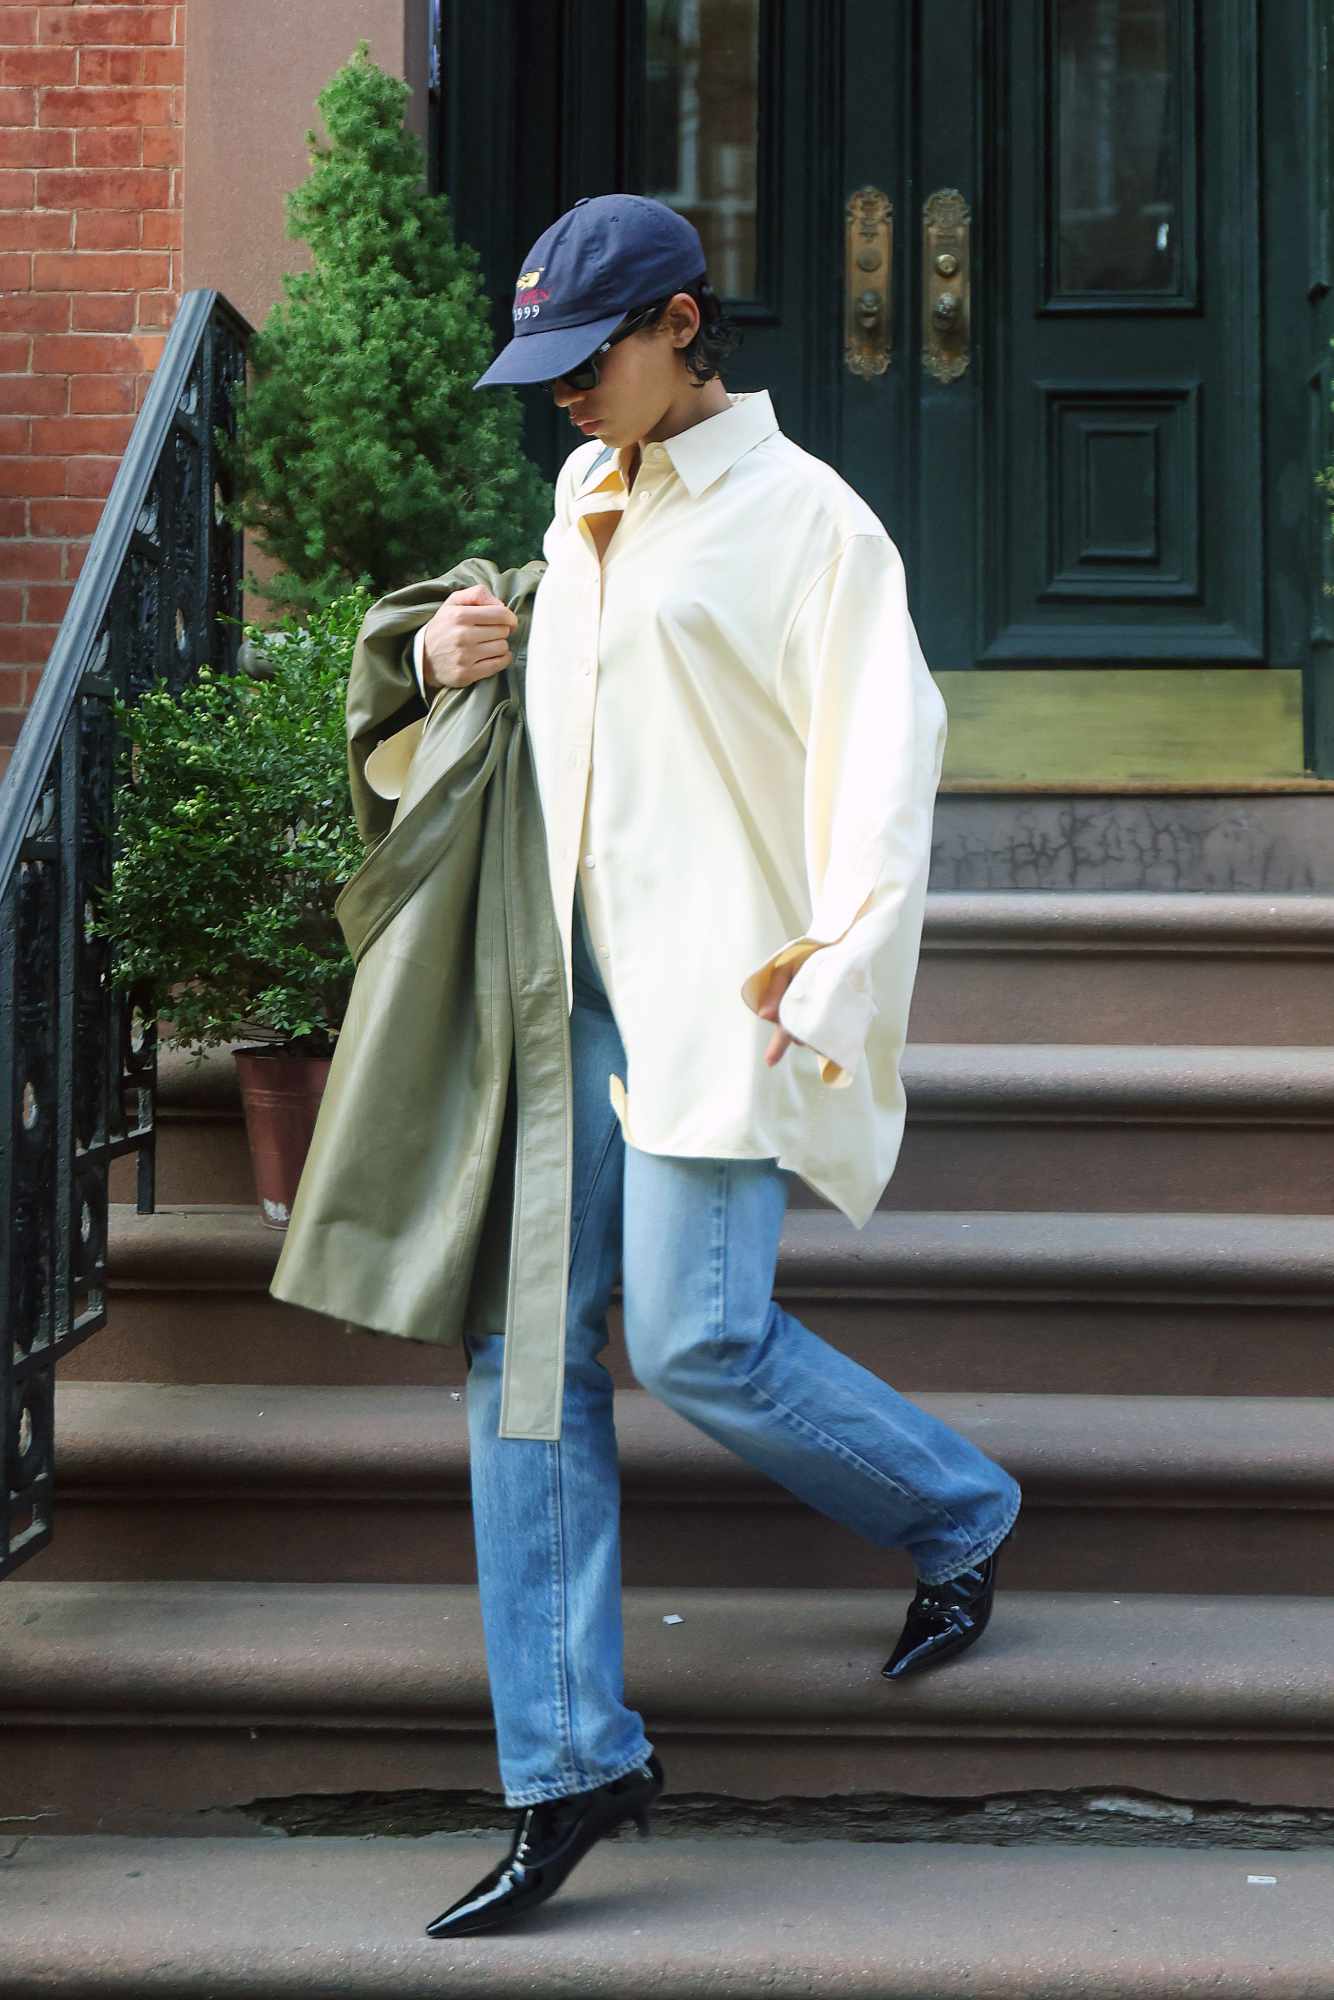 Taylor Russell wears a blue hat, oversized white shirt, washed jeans, and black heeled boots